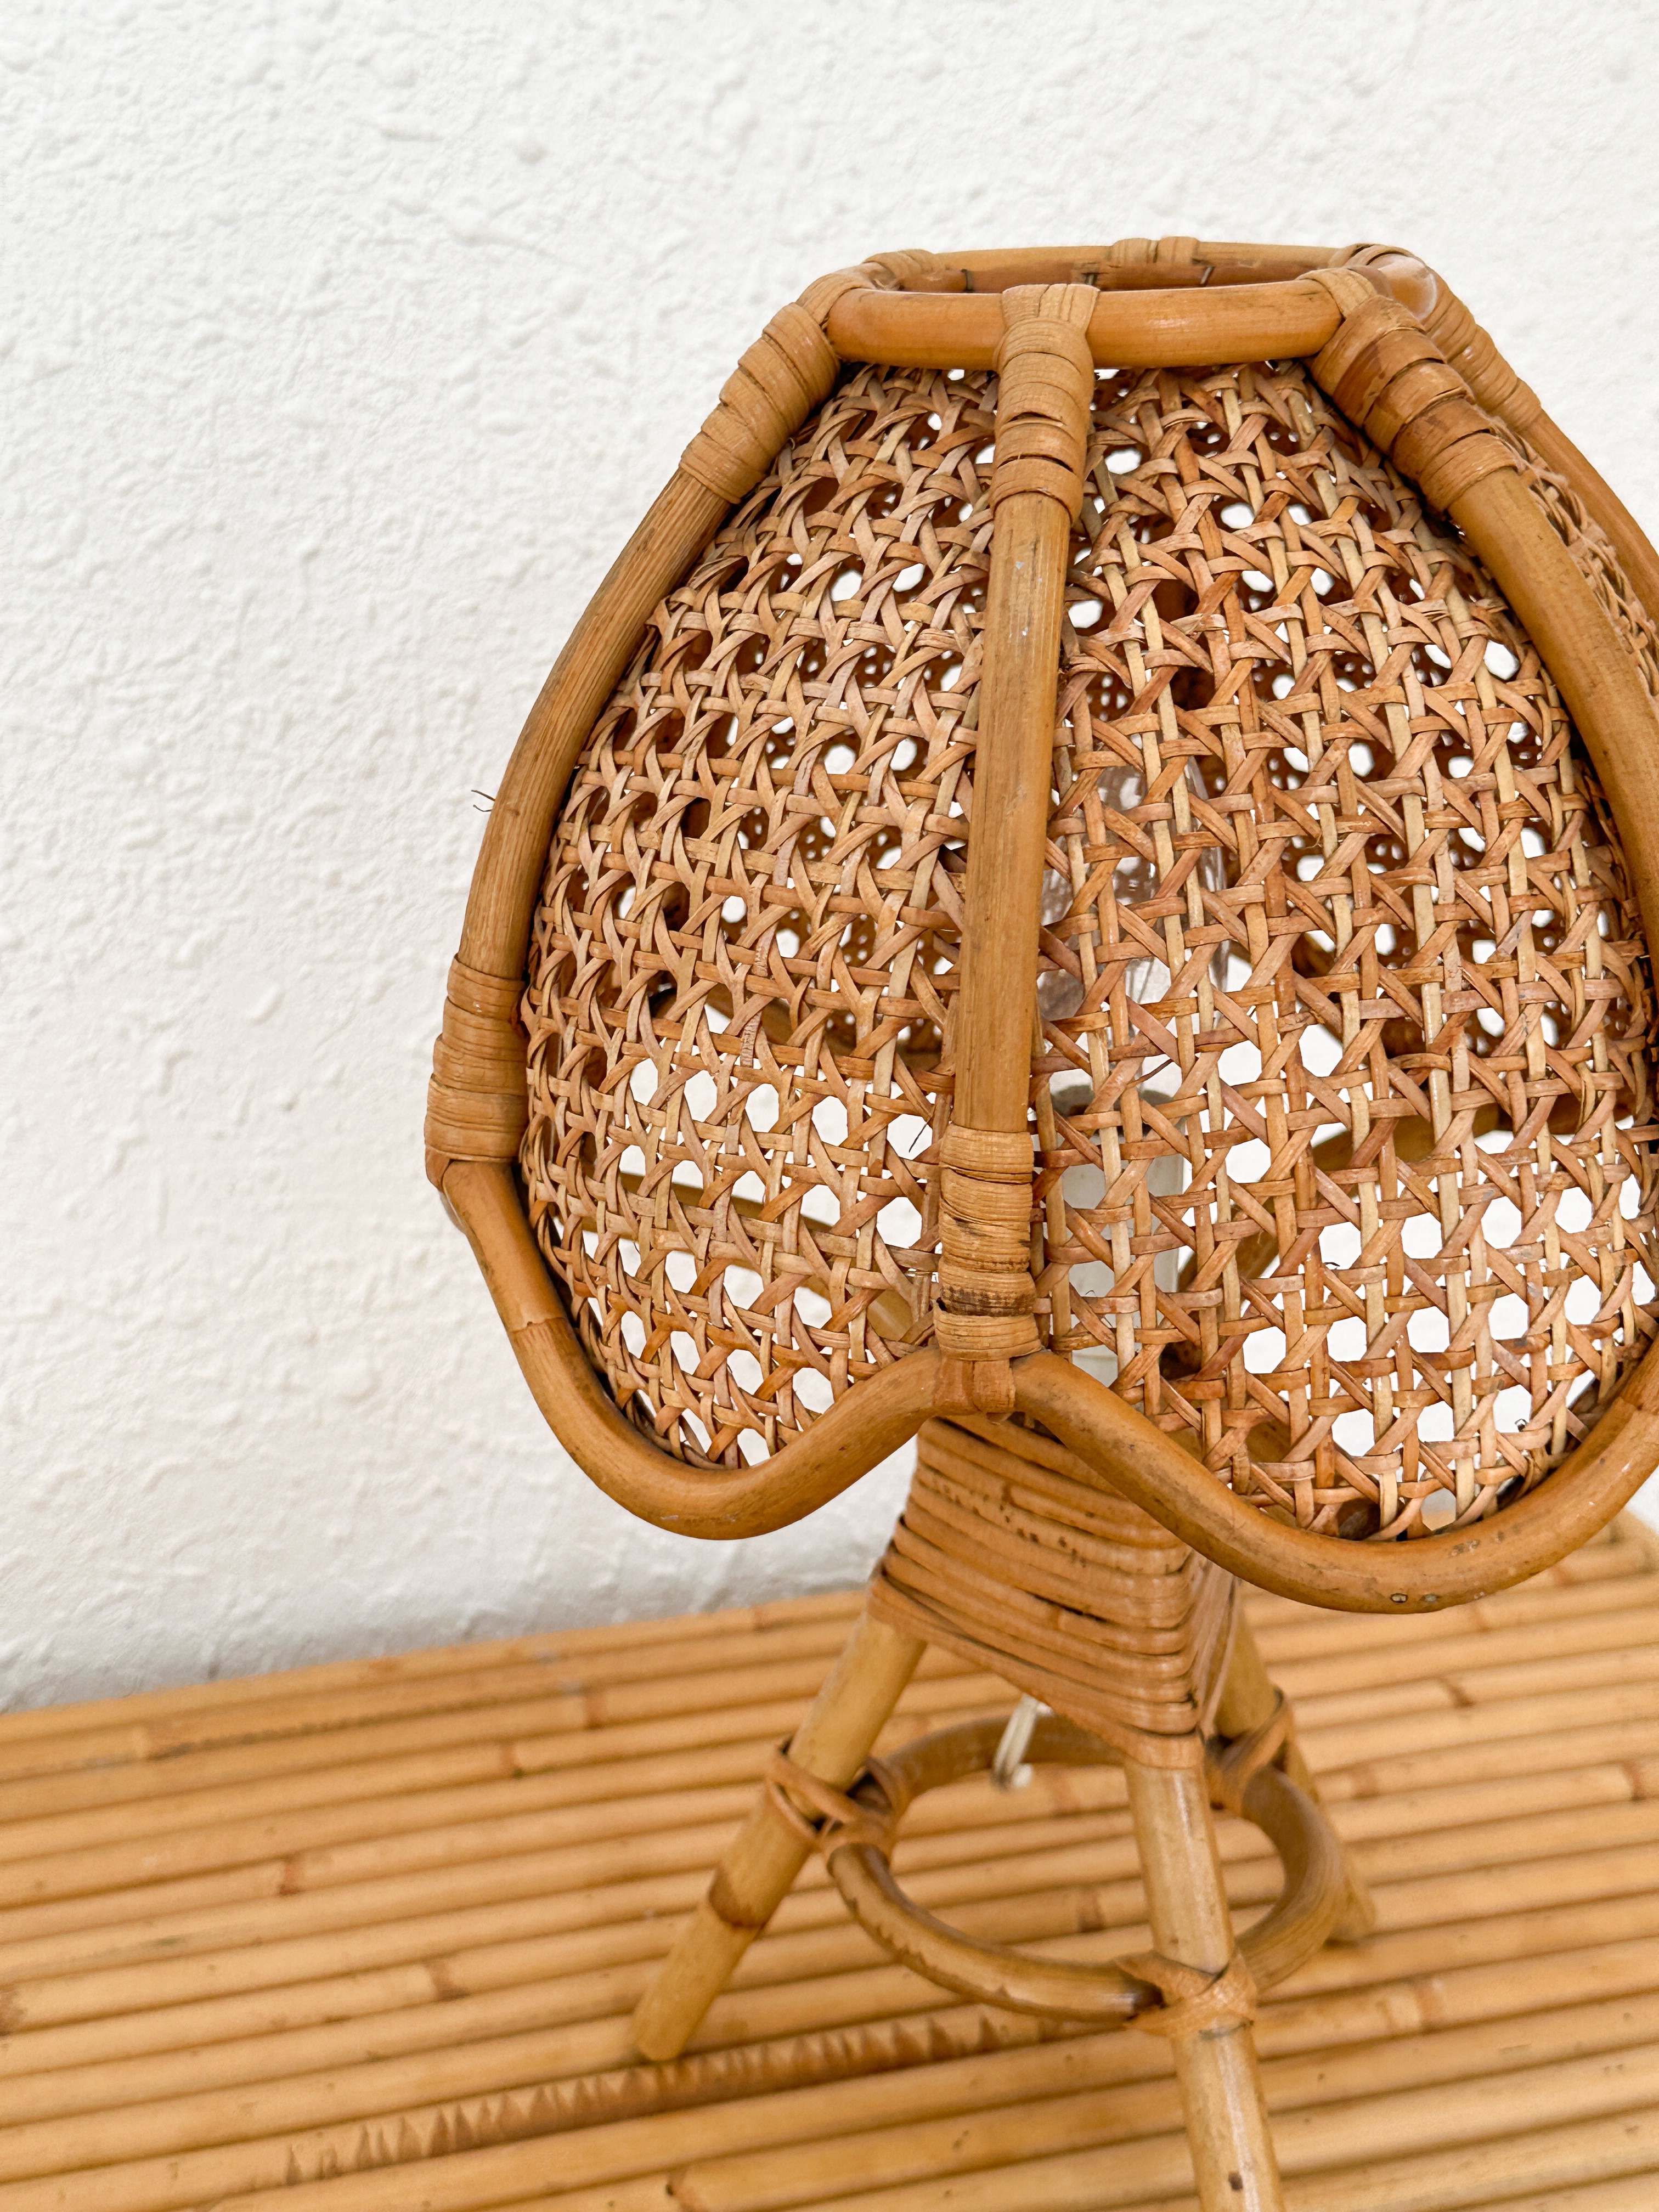 a wicker chair sitting on top of a wooden floor